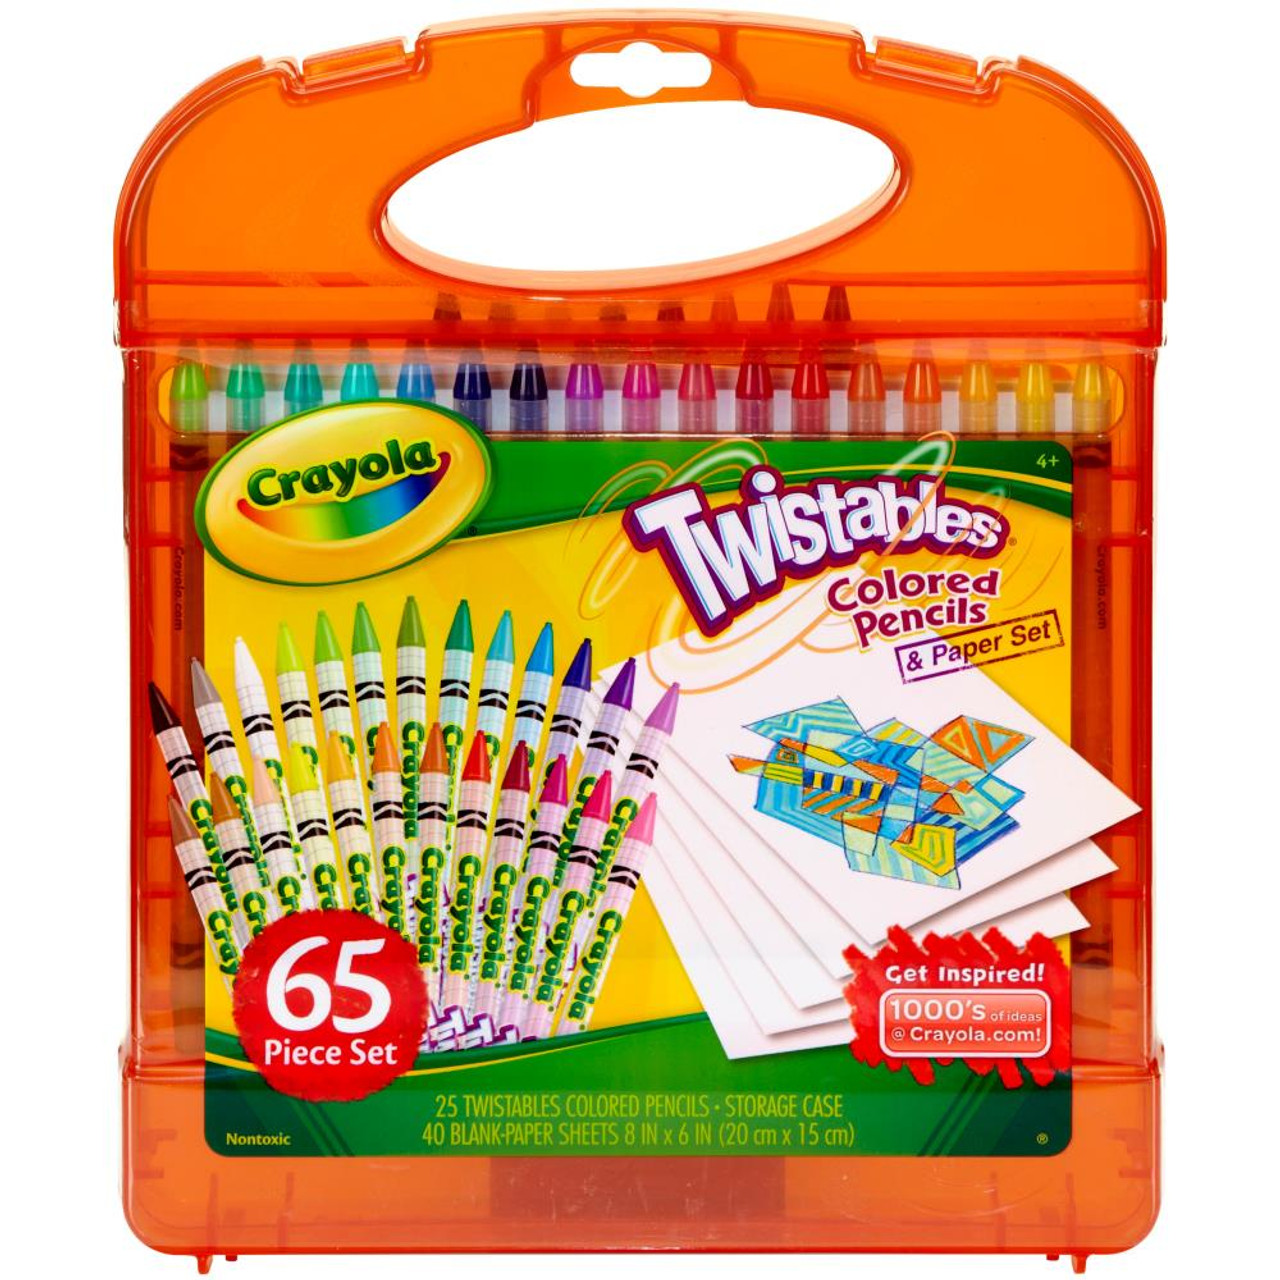 Crayola Giant Paper Pad, 30 Blank Coloring Pages, Art Supplies For Kids